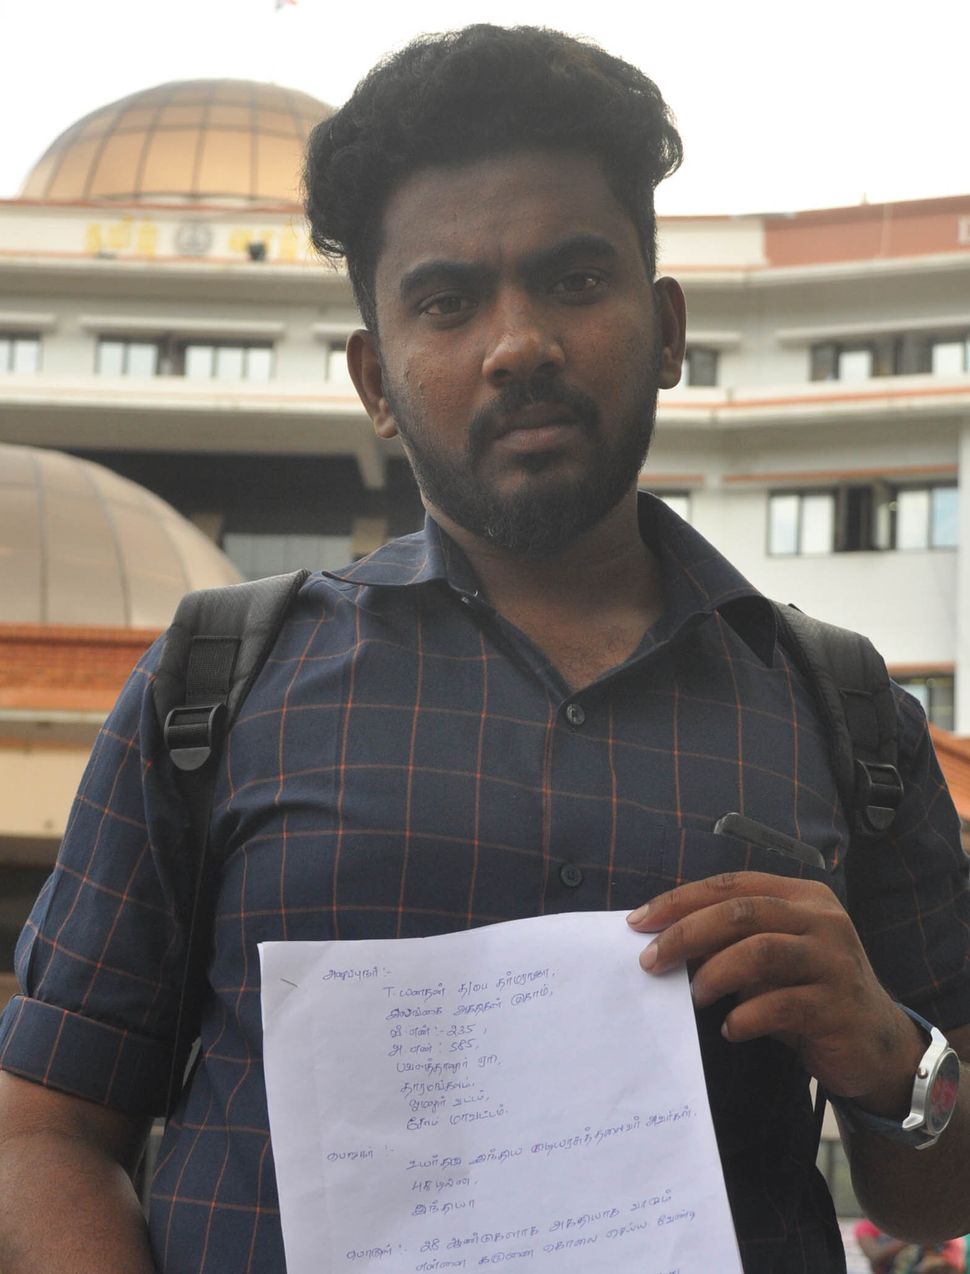 Yanadhan in front of the Salem district collectorate. He has sent copies of his petition reuqesting a mercy killing to President Ram Nath Kovind and Tamil Nadu governor Banwarilal Purohit.